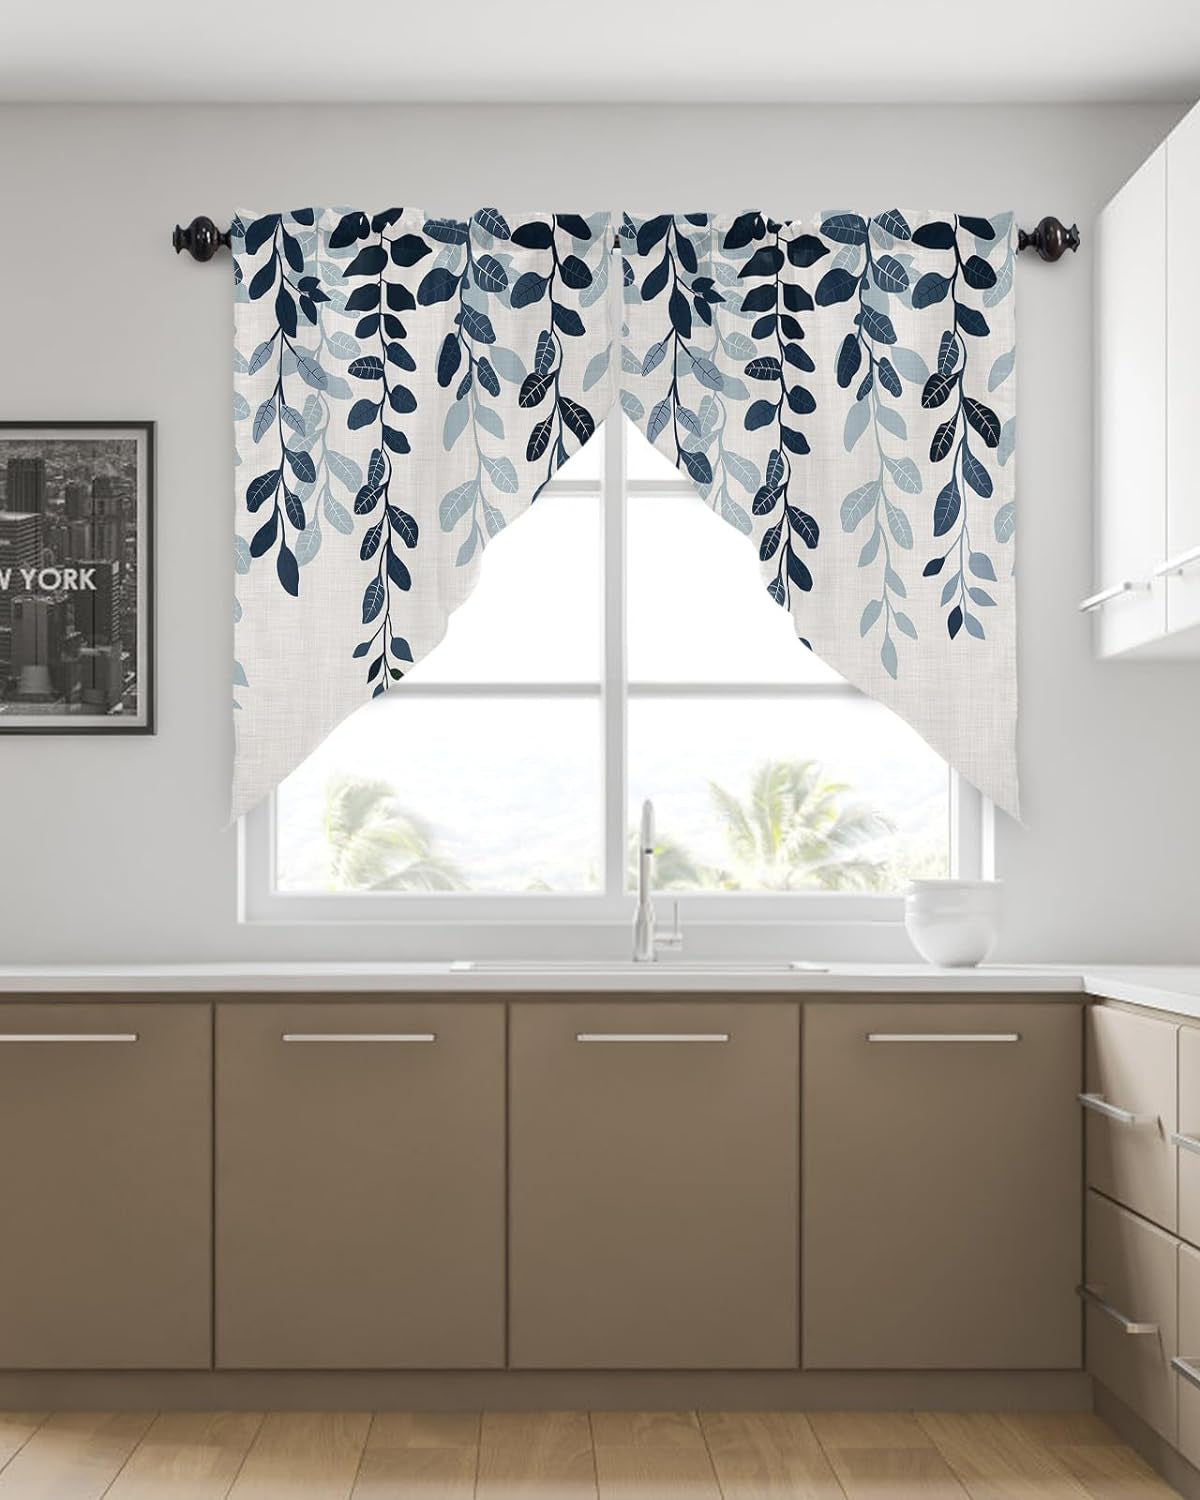 Blue Eucalyptus Swag Curtains for Living Room/Kitchen/Bedroom/Bathroom, Swag Valance Curtains Short Half Kitchen Topper Curtains Window Swag 2 Panels 36''X36'' Vintage Gradual Leaves Contemporary